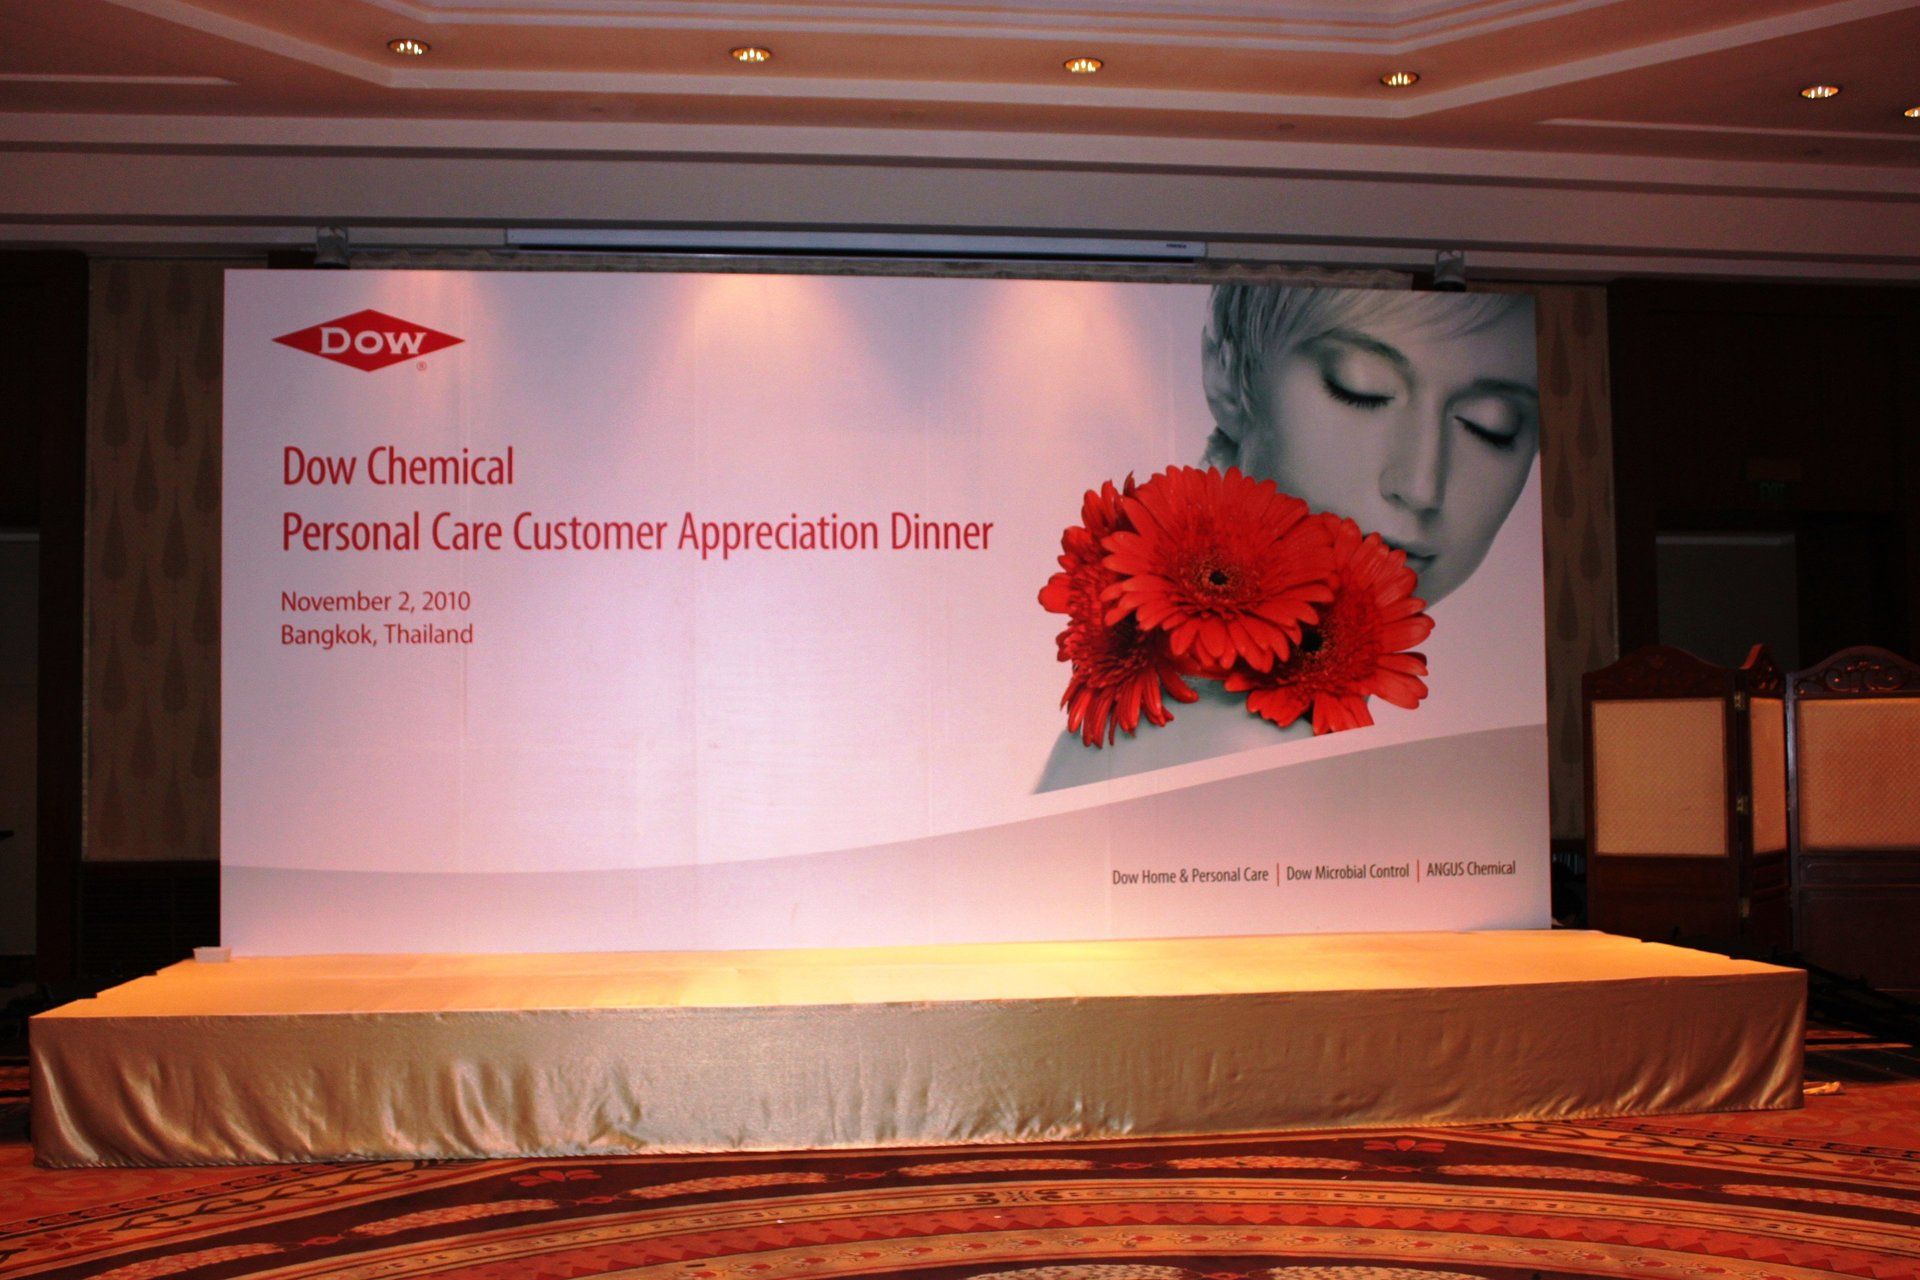 Dow Chemical customer appreciation dinner @ Thailand 2010. Booth designed and built by Essential Global Fairs.